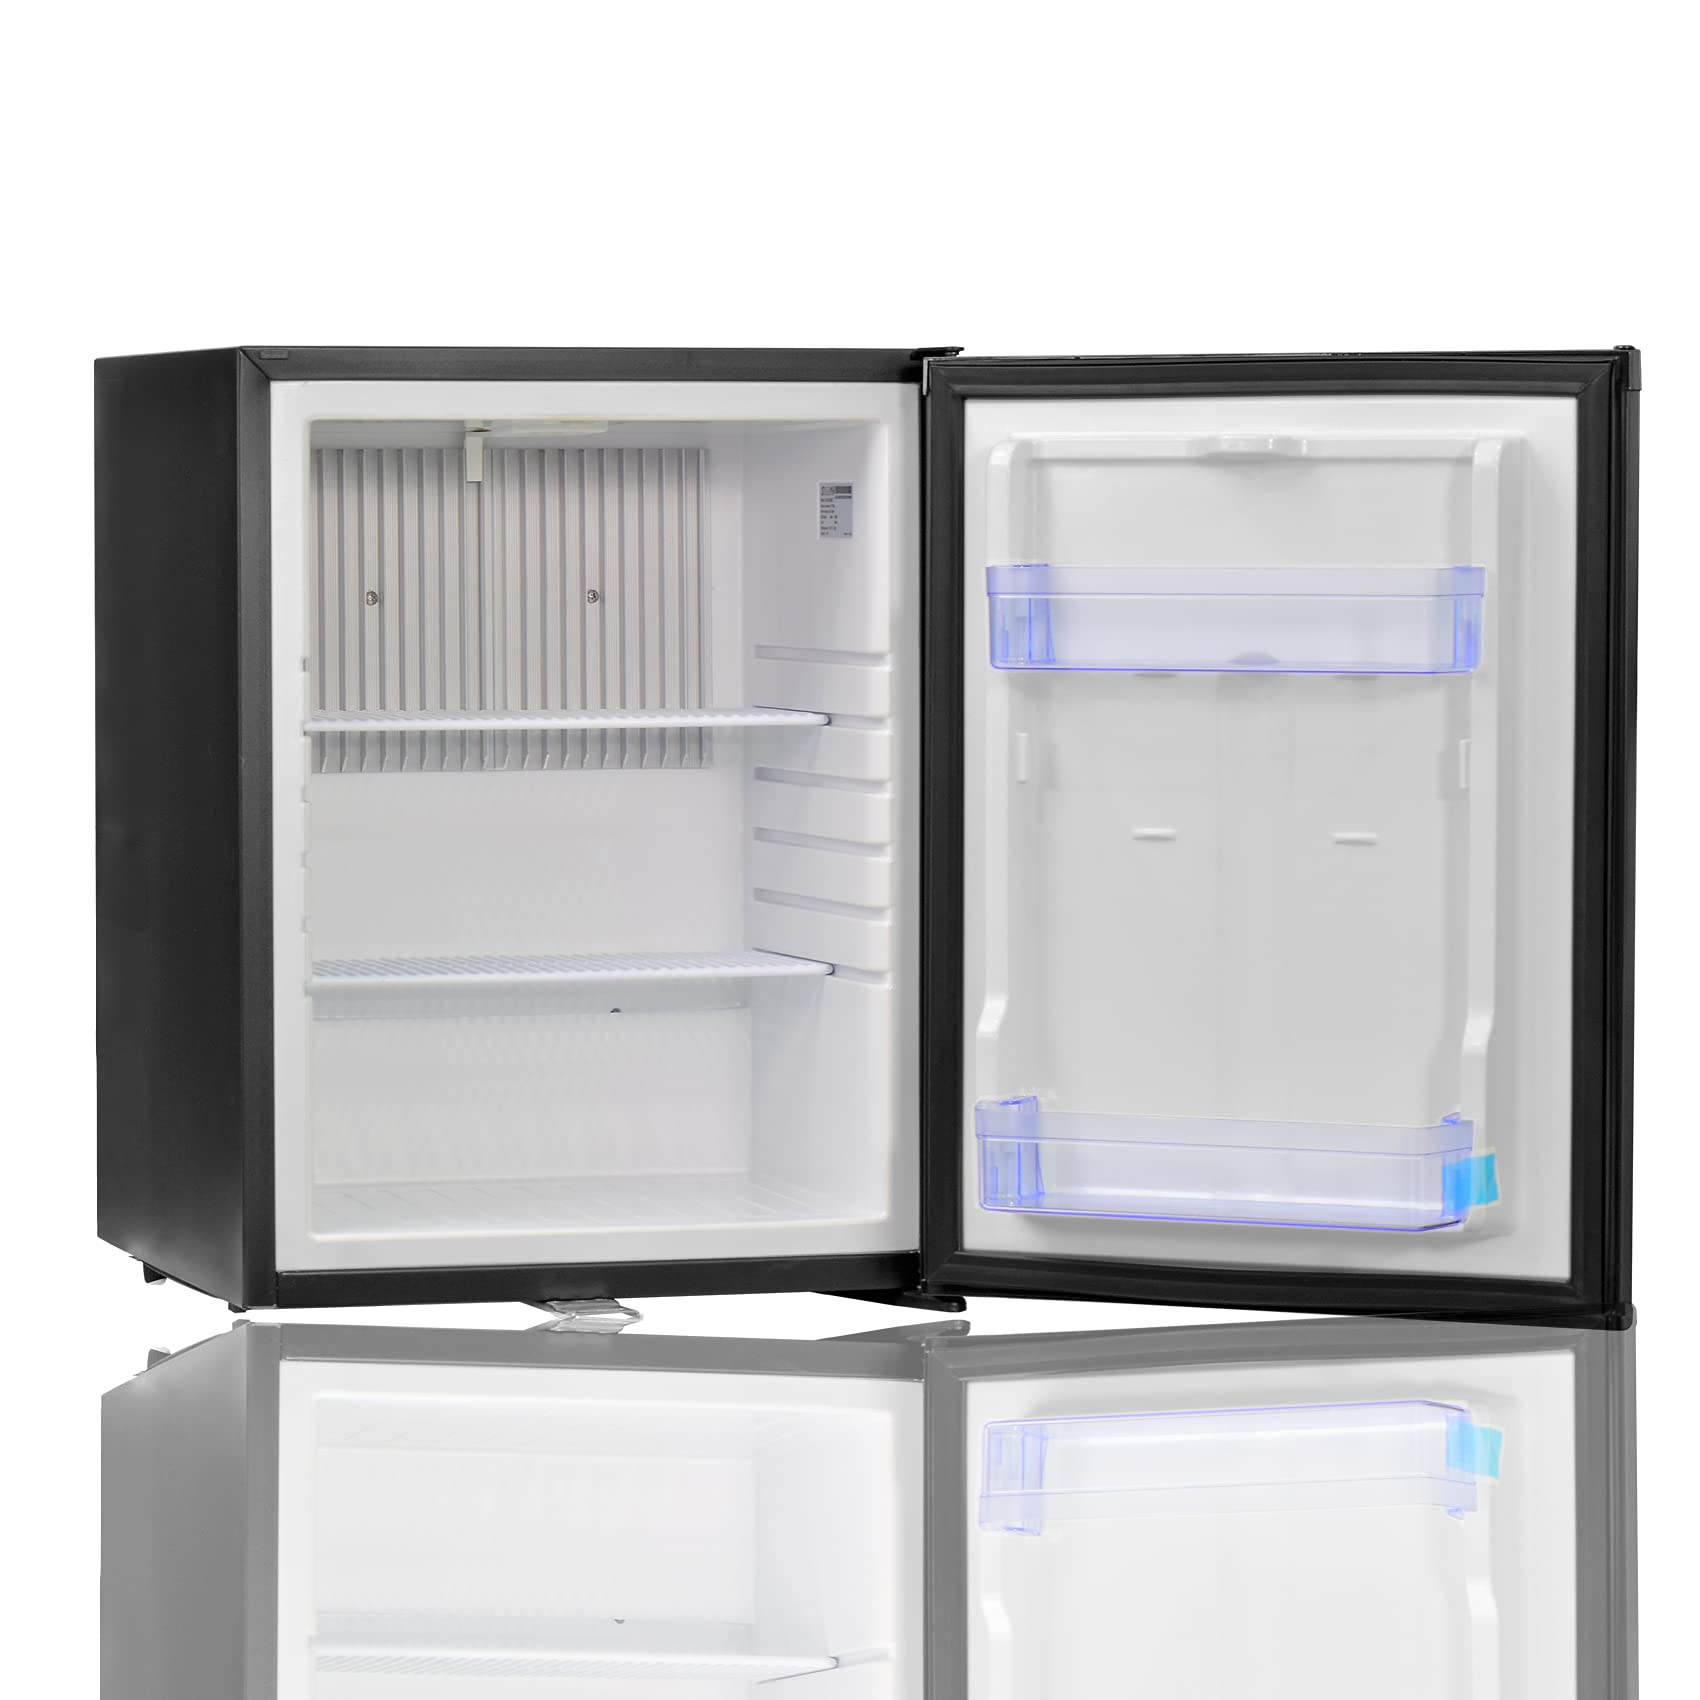 SMAD Camping Fridge - 60L Absorber Refrigerator with Lock – Smad EU